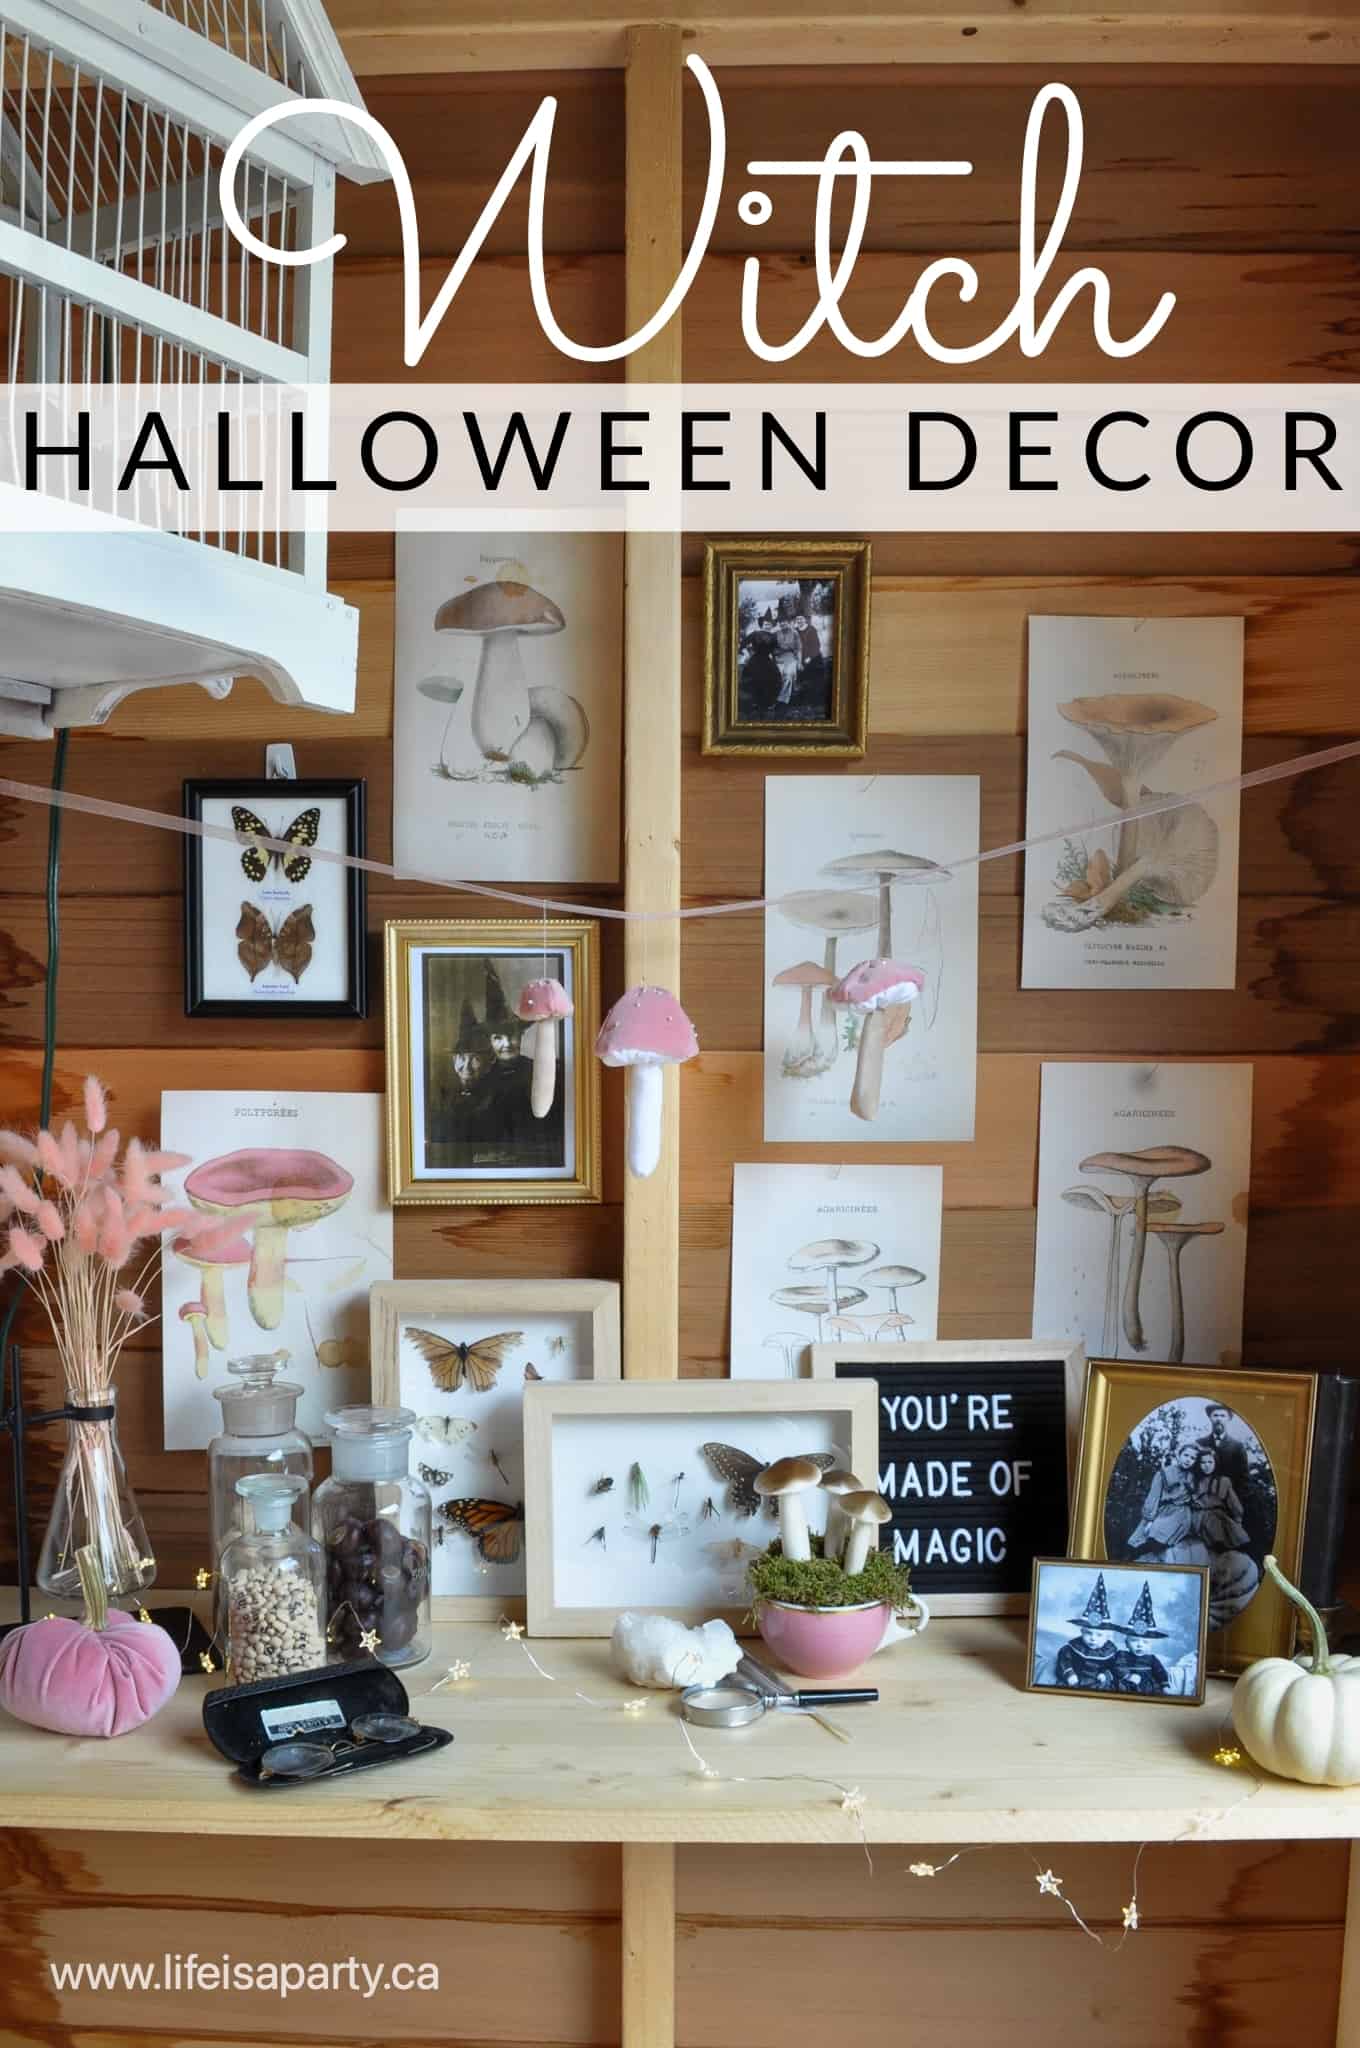 Witch Halloween Decor: inspired by Harry Potter, our garden shed is full of vintage and elegant witch decorations perfect for Halloween.